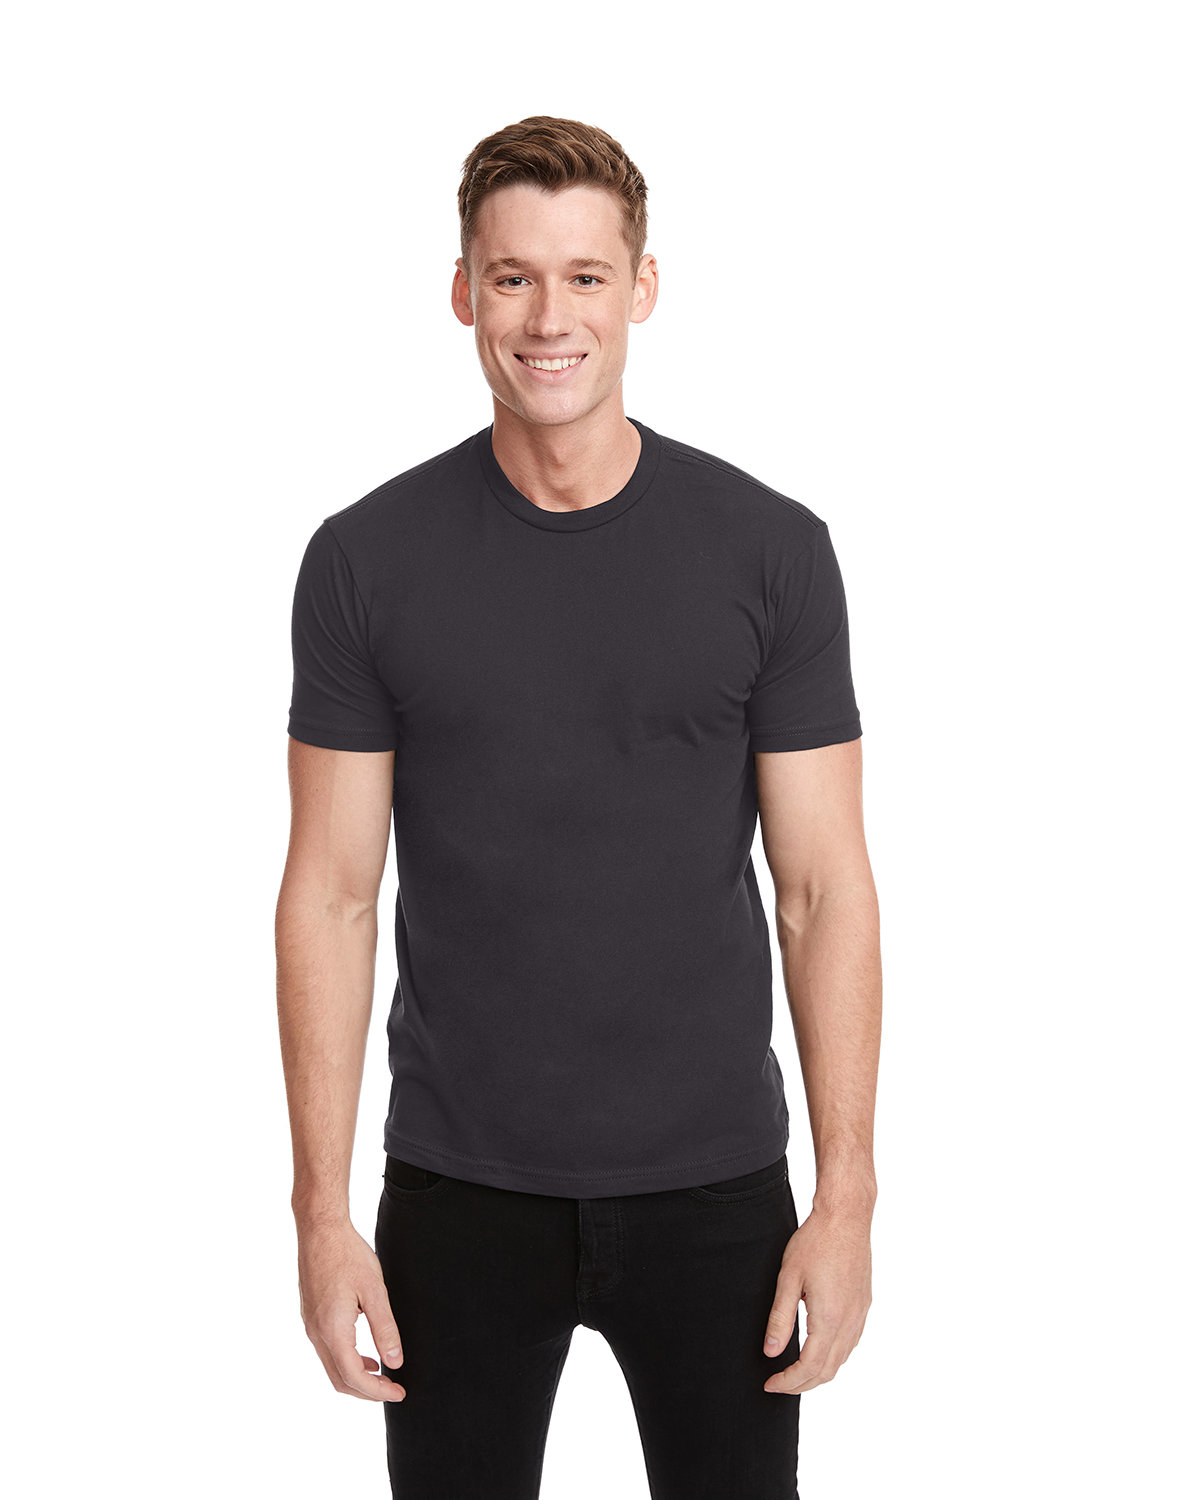 Men's Fitted T-Shirt - Next Level 3600